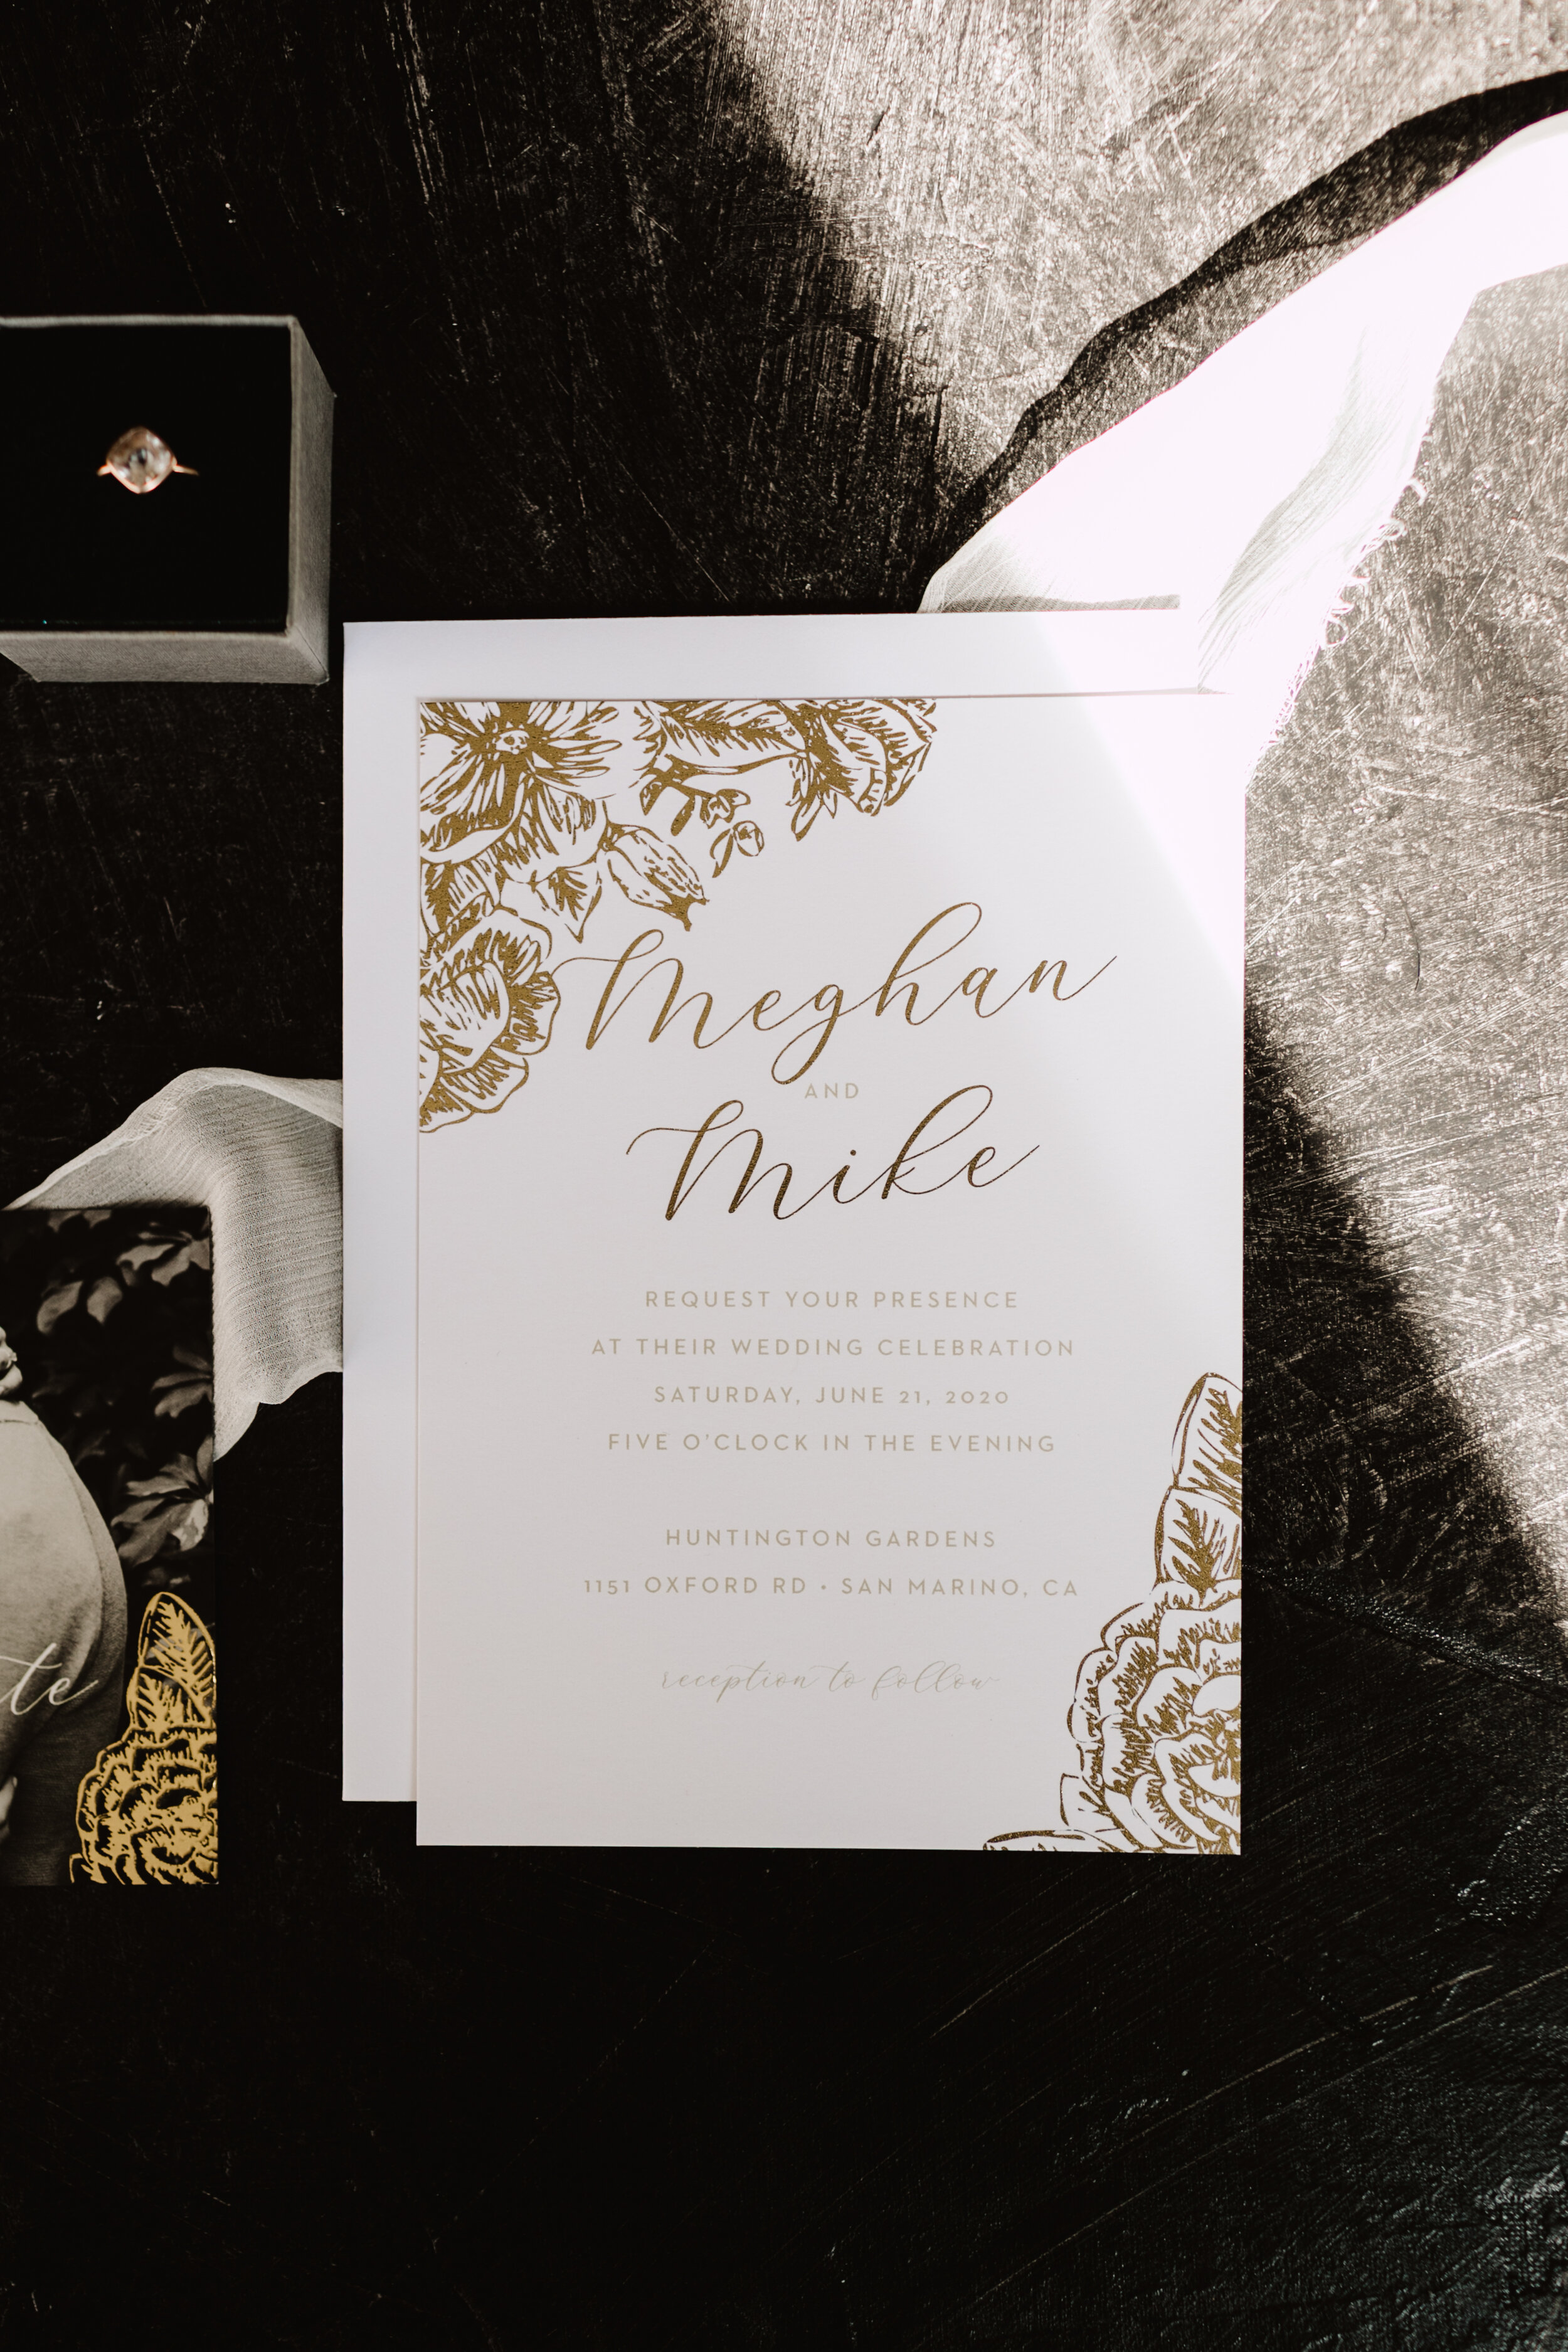 Basic Invite, Wedding Invitations, Save the Dates, Save the Date Maganets, Emily Wehner Photography-3.jpg